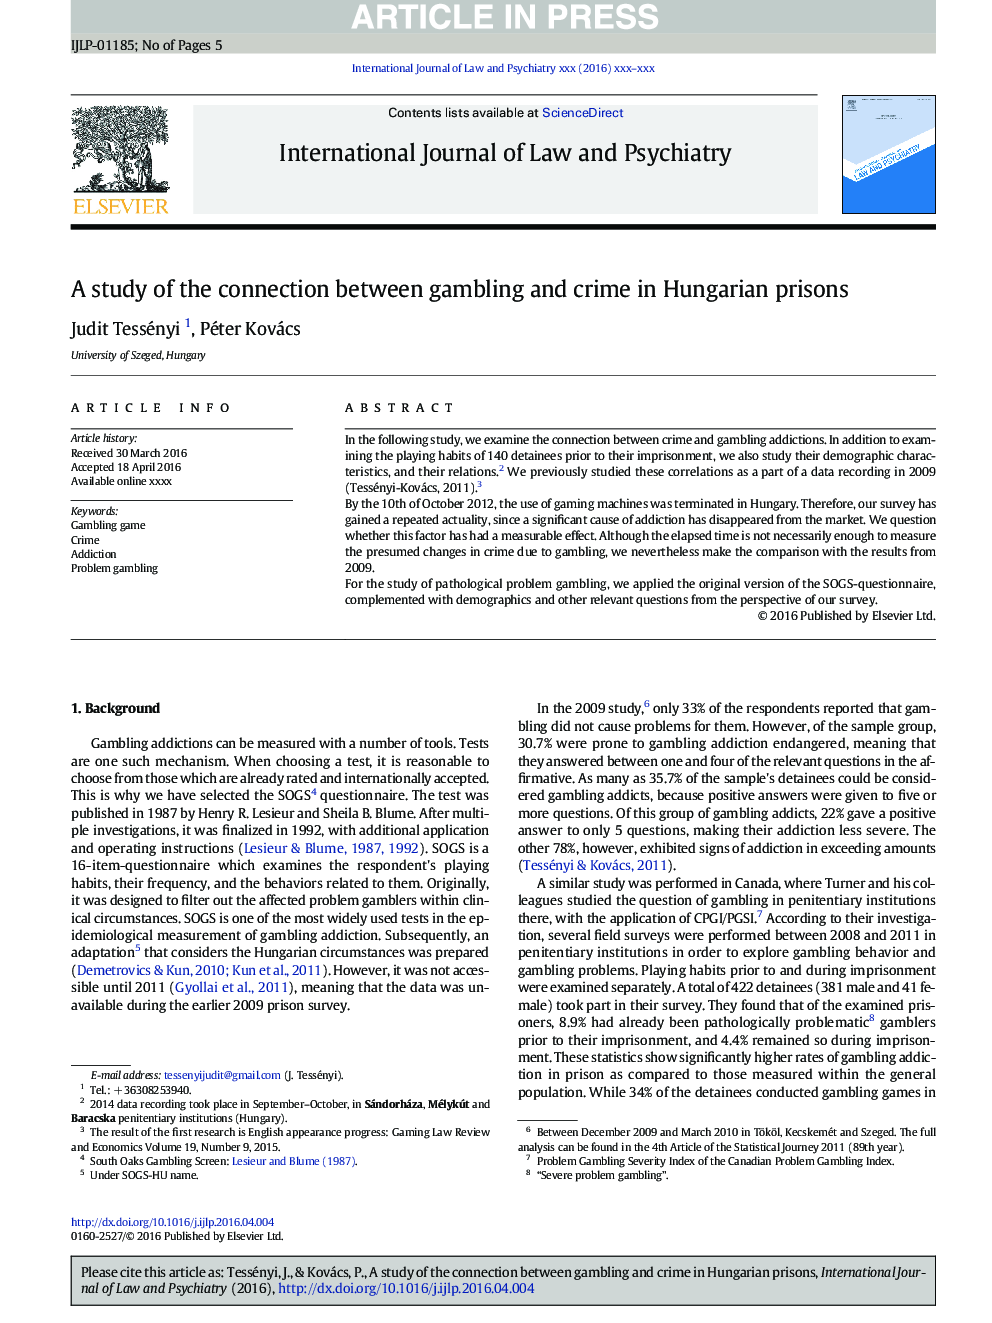 A study of the connection between gambling and crime in Hungarian prisons